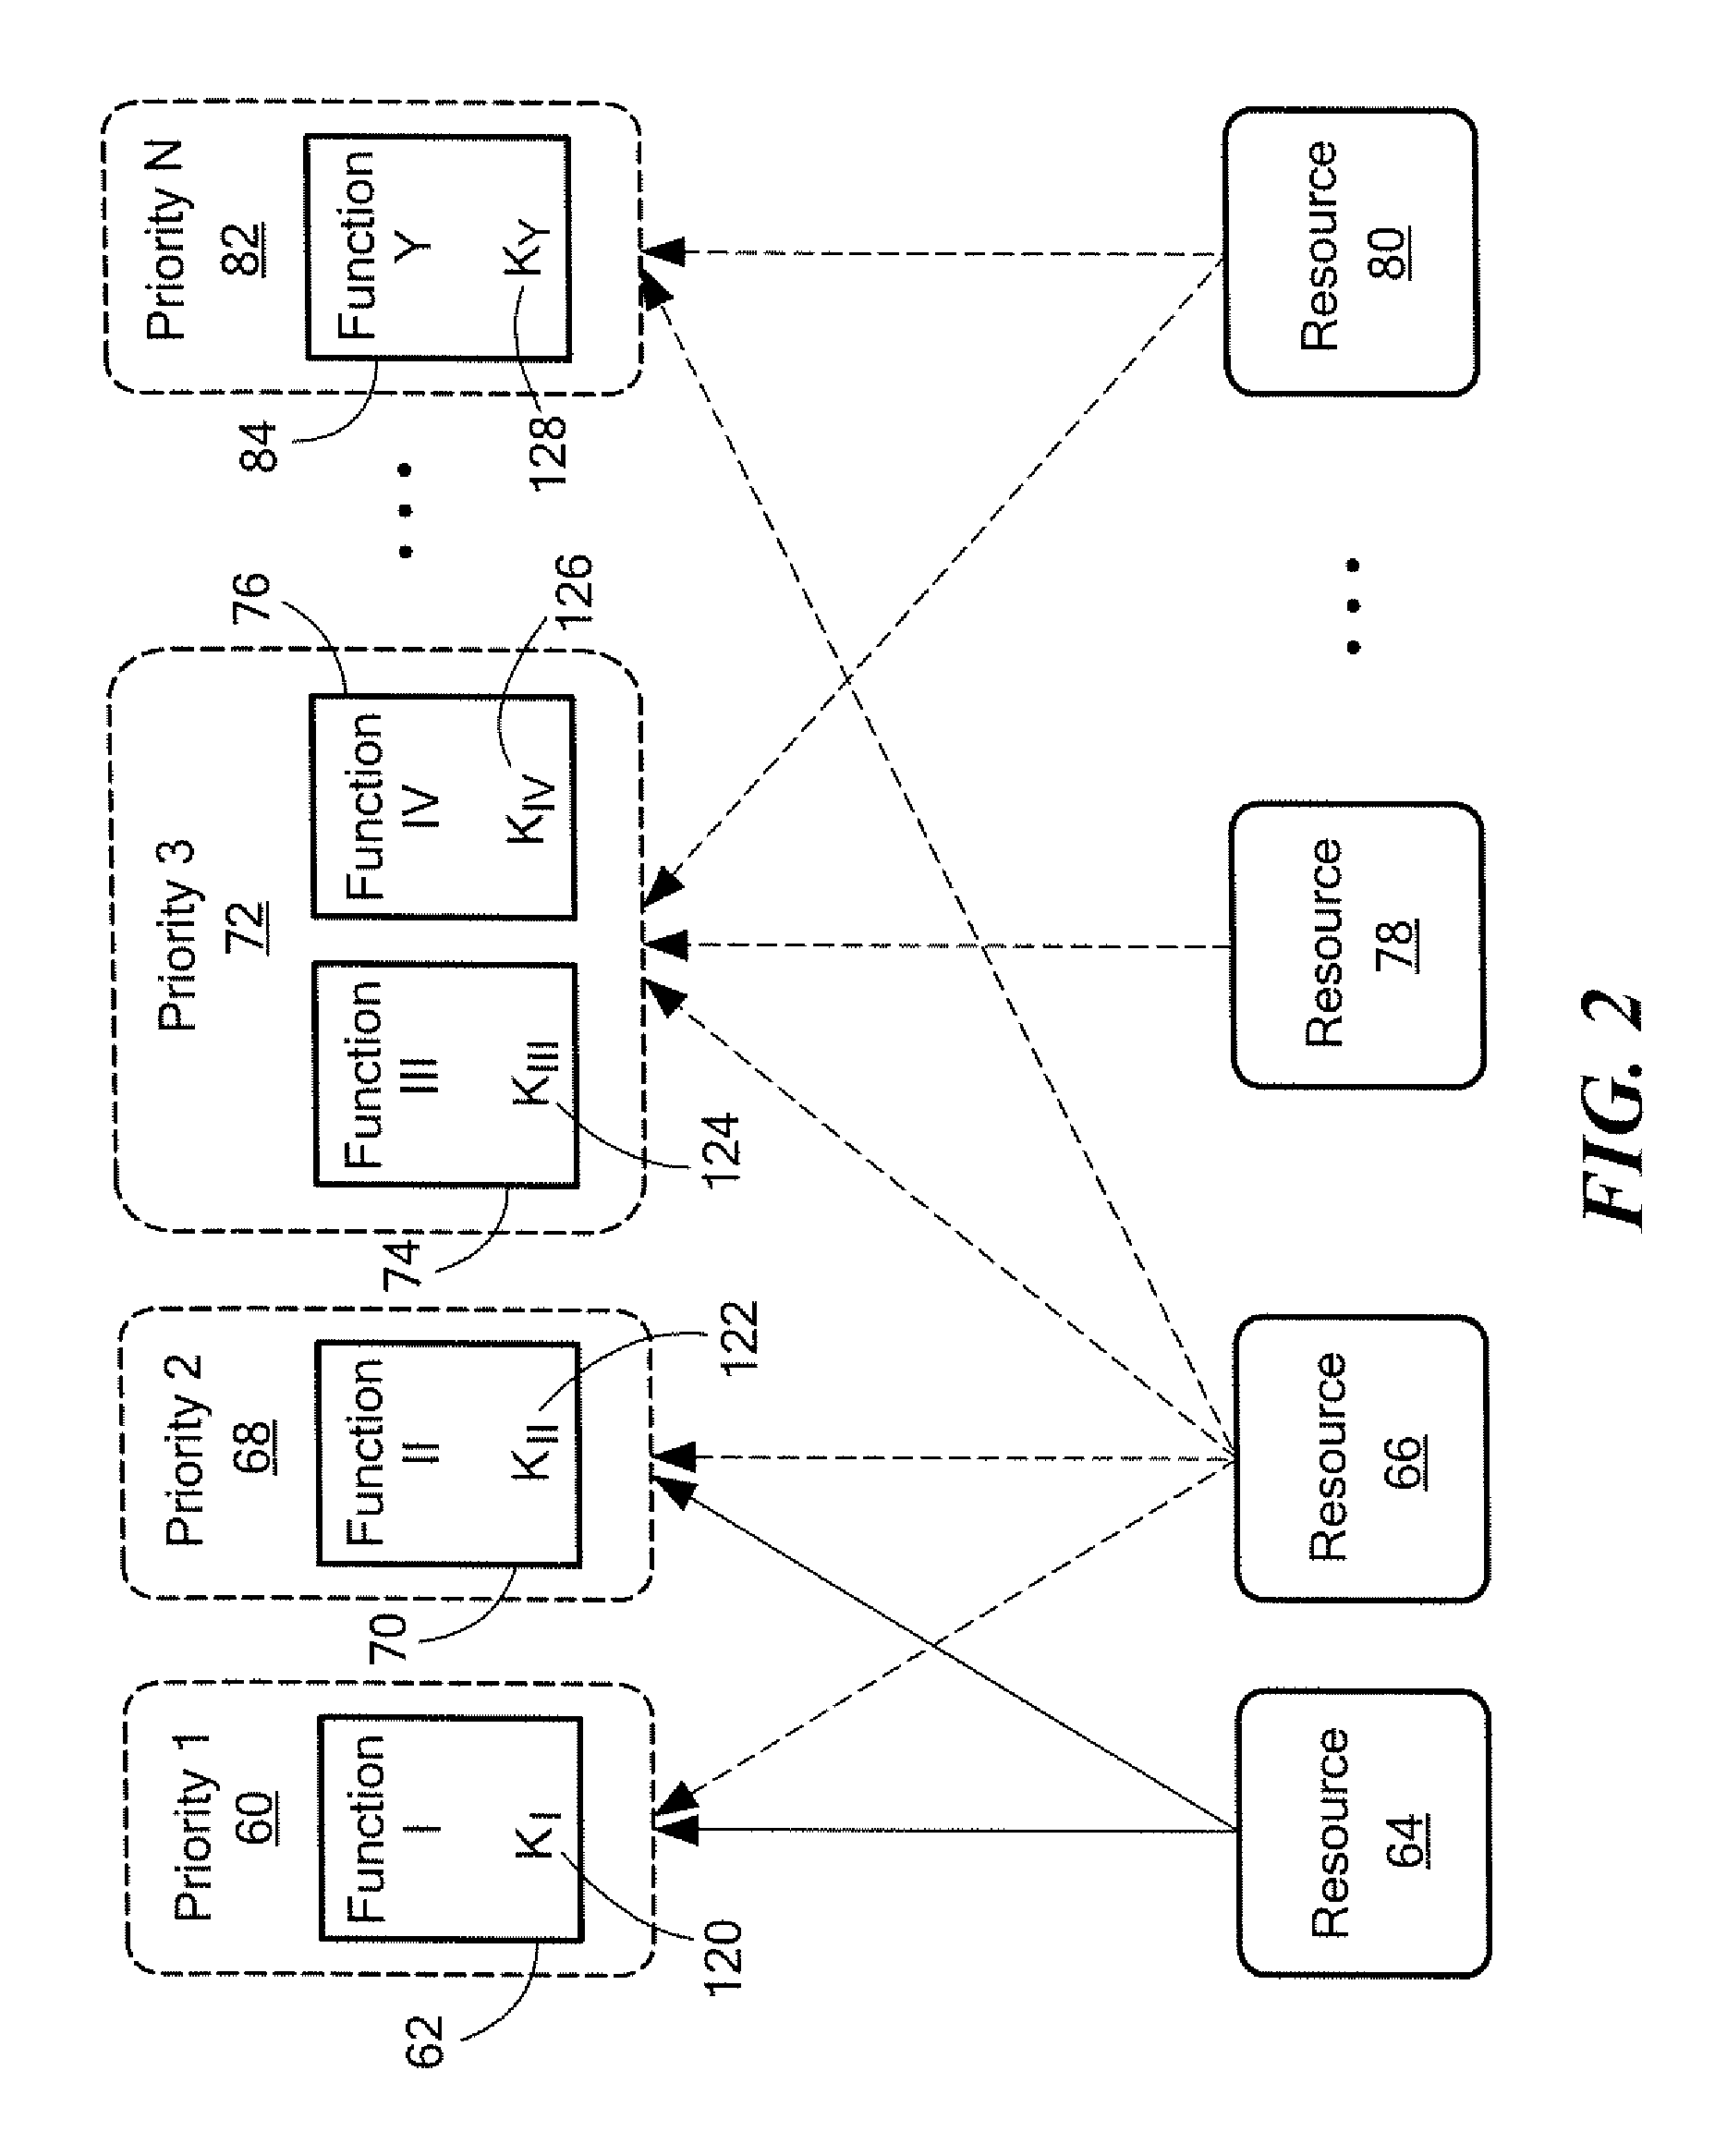 Multi-function power regulator for prioritizing functions and allocating resources thereof